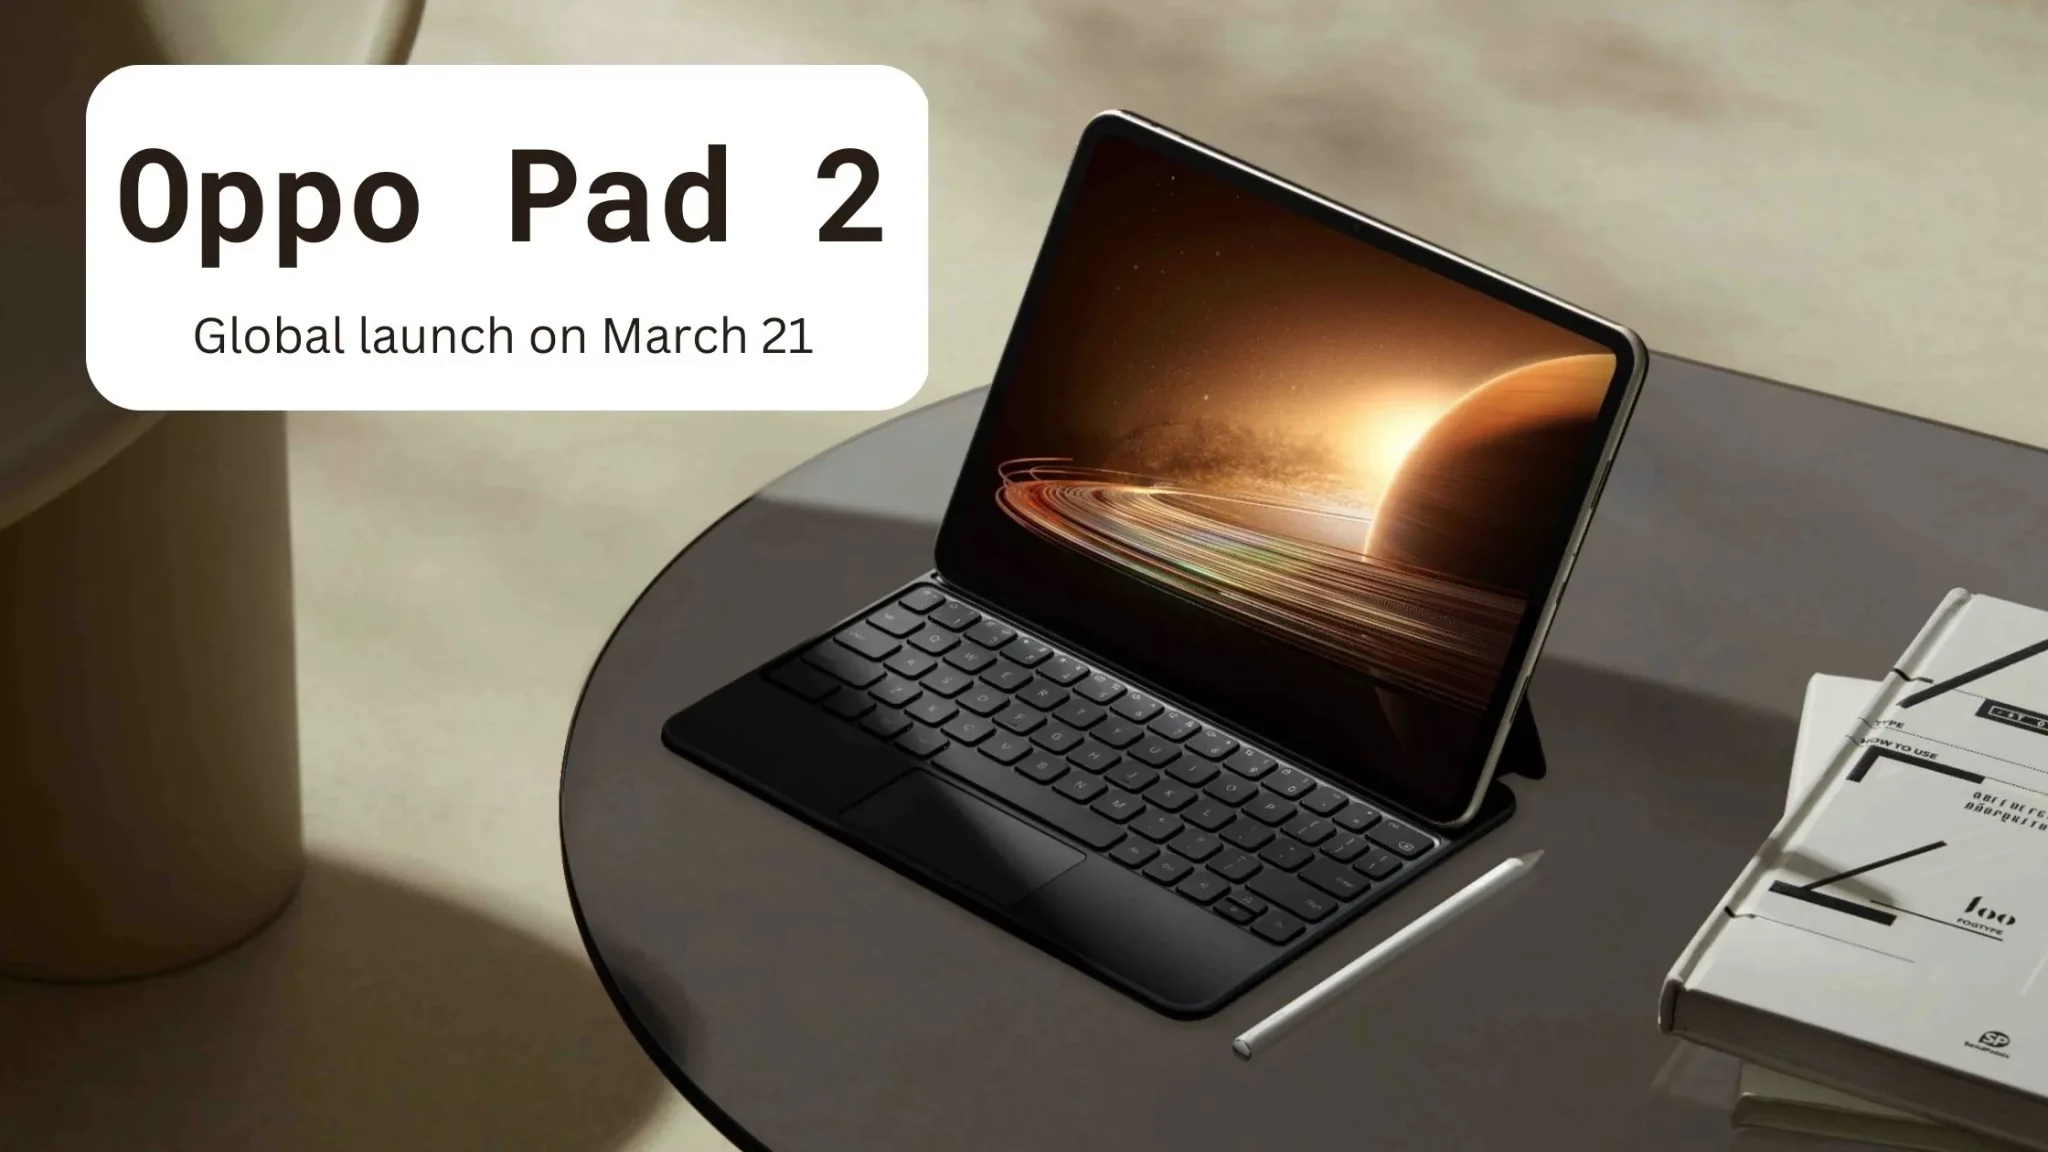 Oppo Pad 2 Global Launch Scheduled on March 21